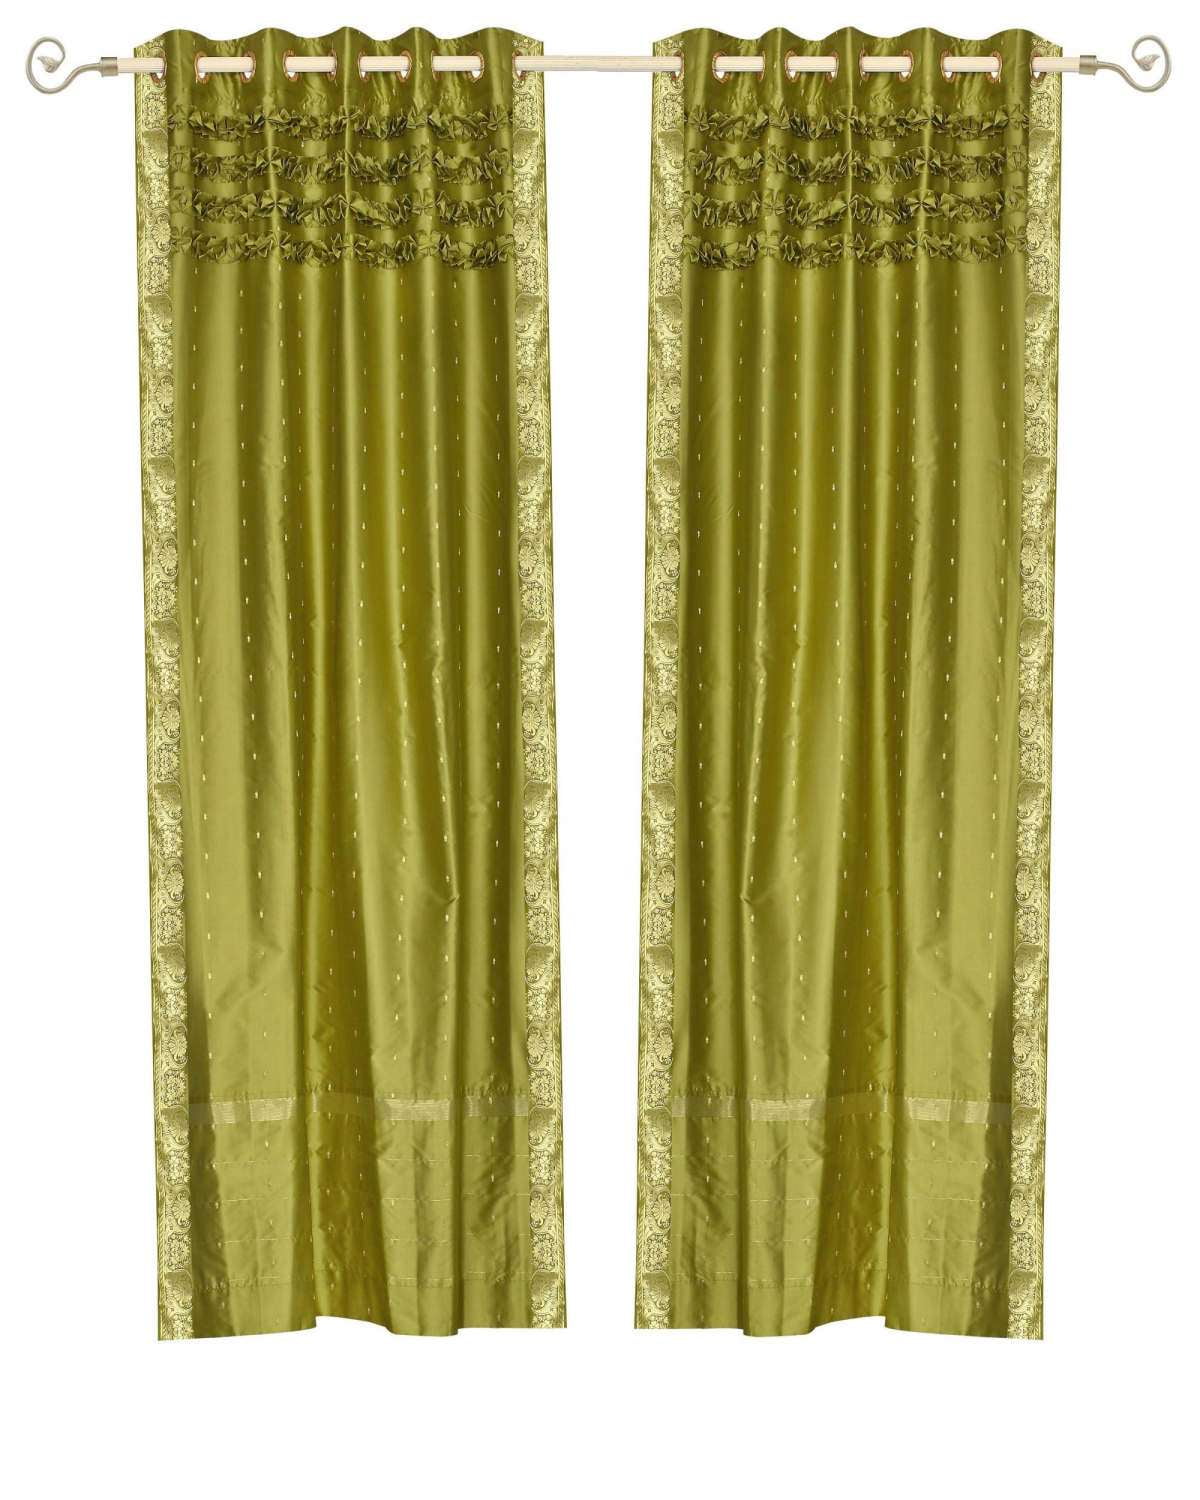 Olive Green Hand Crafted Grommet Sheer Sari Curtain Drape Panel ...